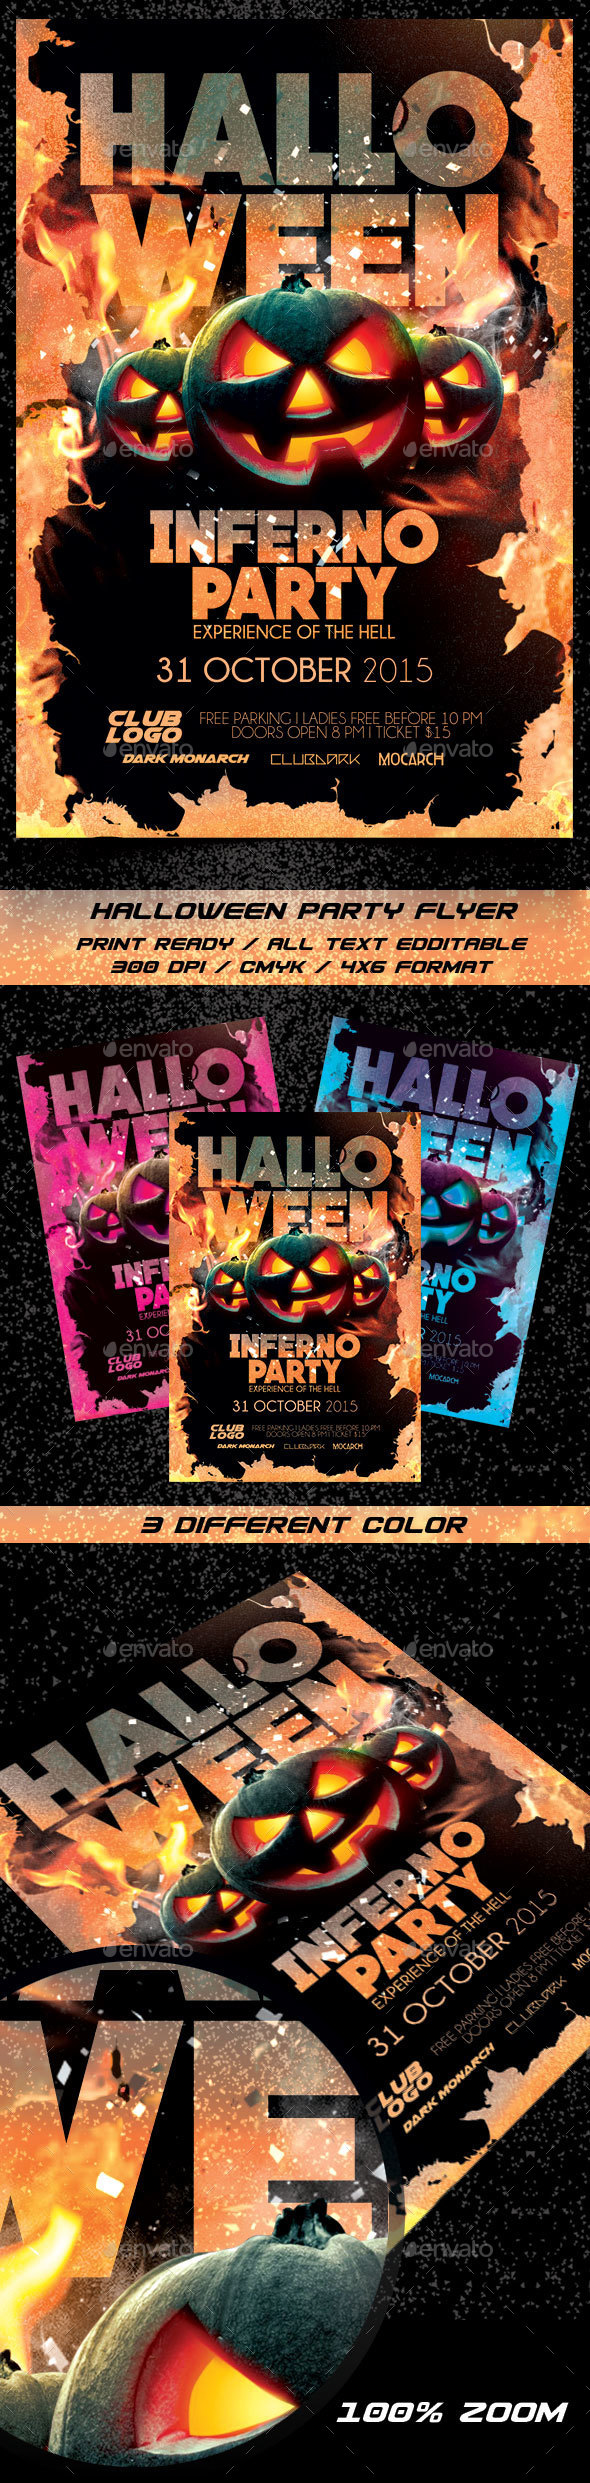 Halloween Inferno Party Flyer Template